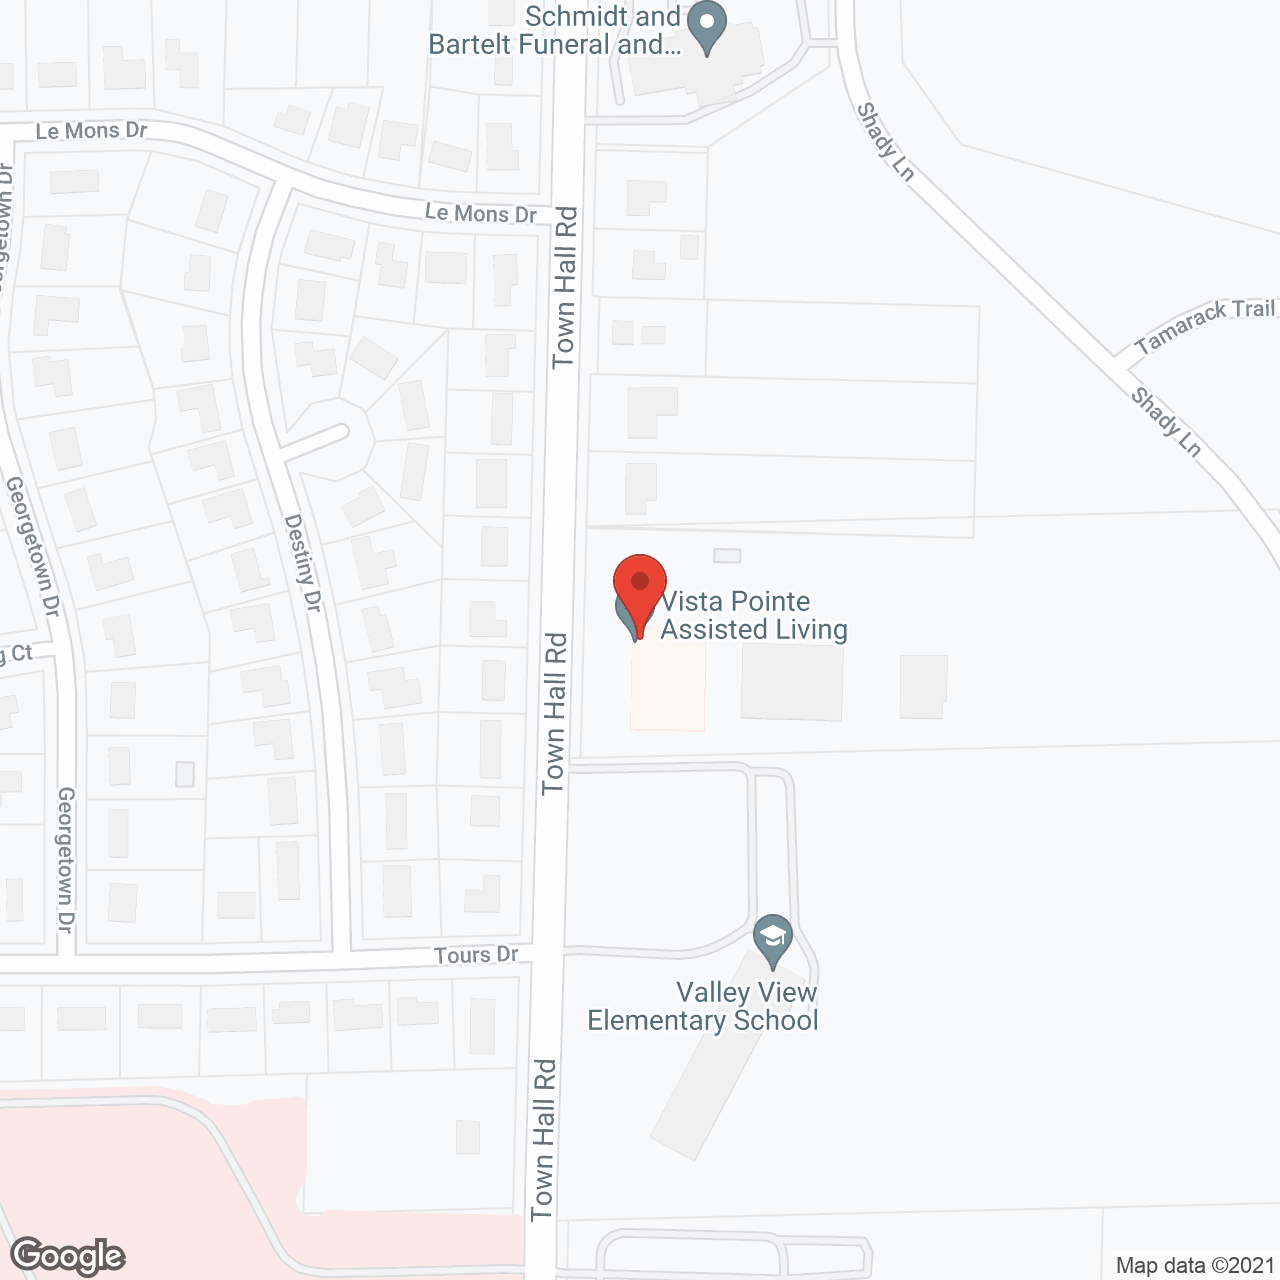 Vista Pointe Assisted Living in google map